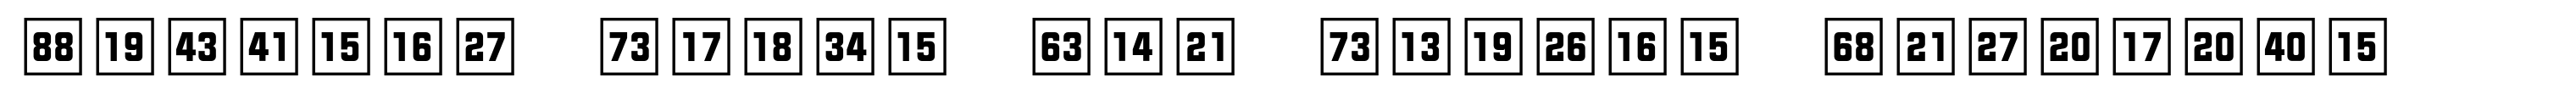 Numbers Style Two Square Positive